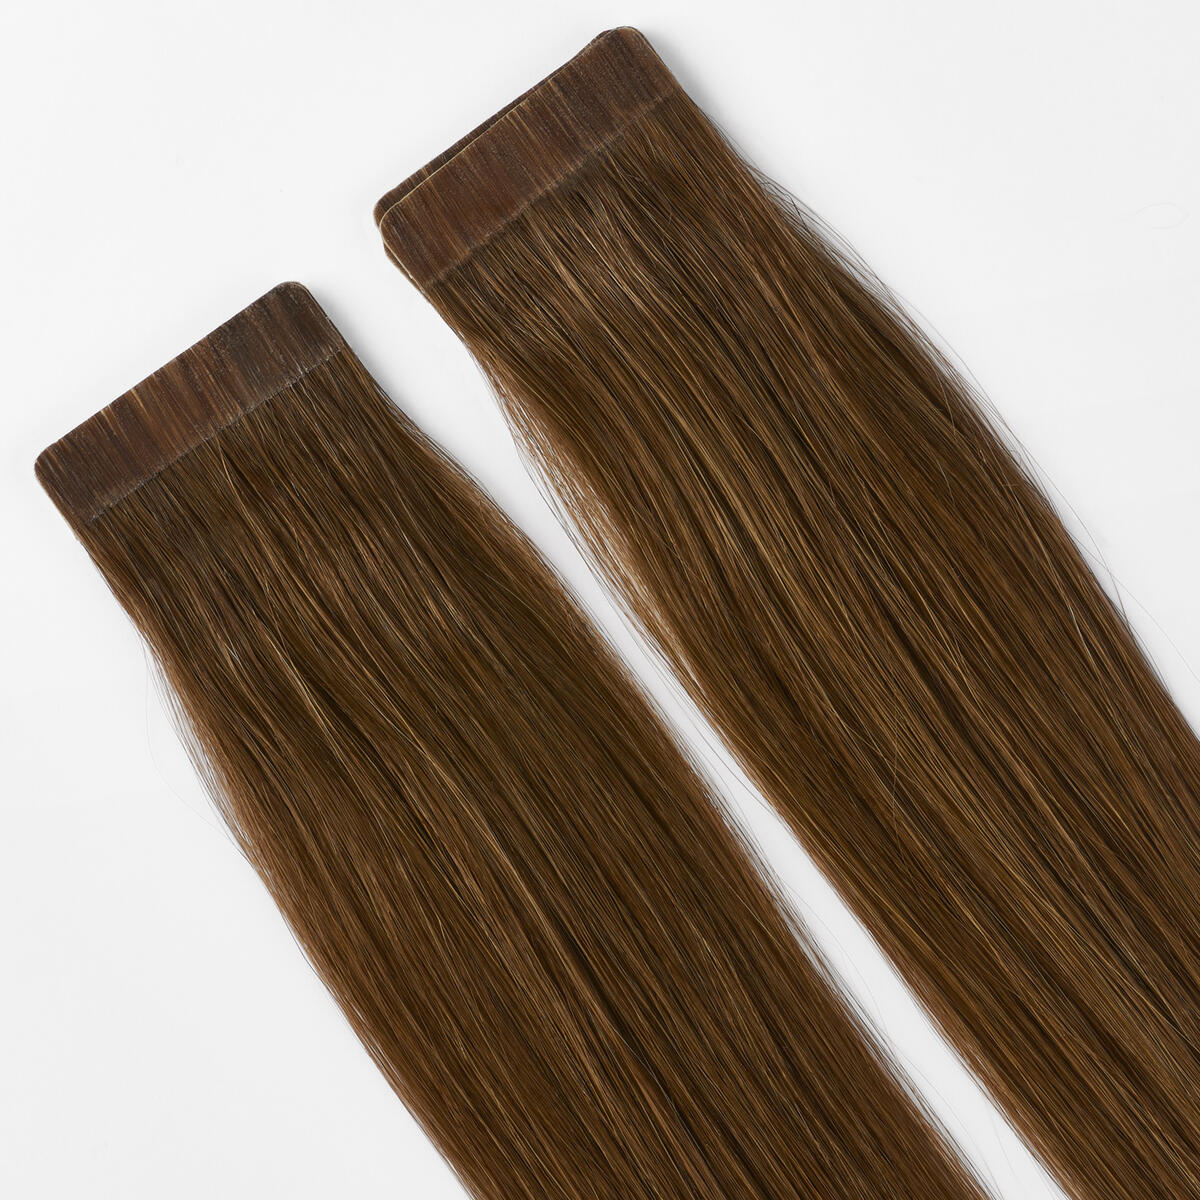 Basic Tape Extensions Classic 4 5.0 Brown 40 cm